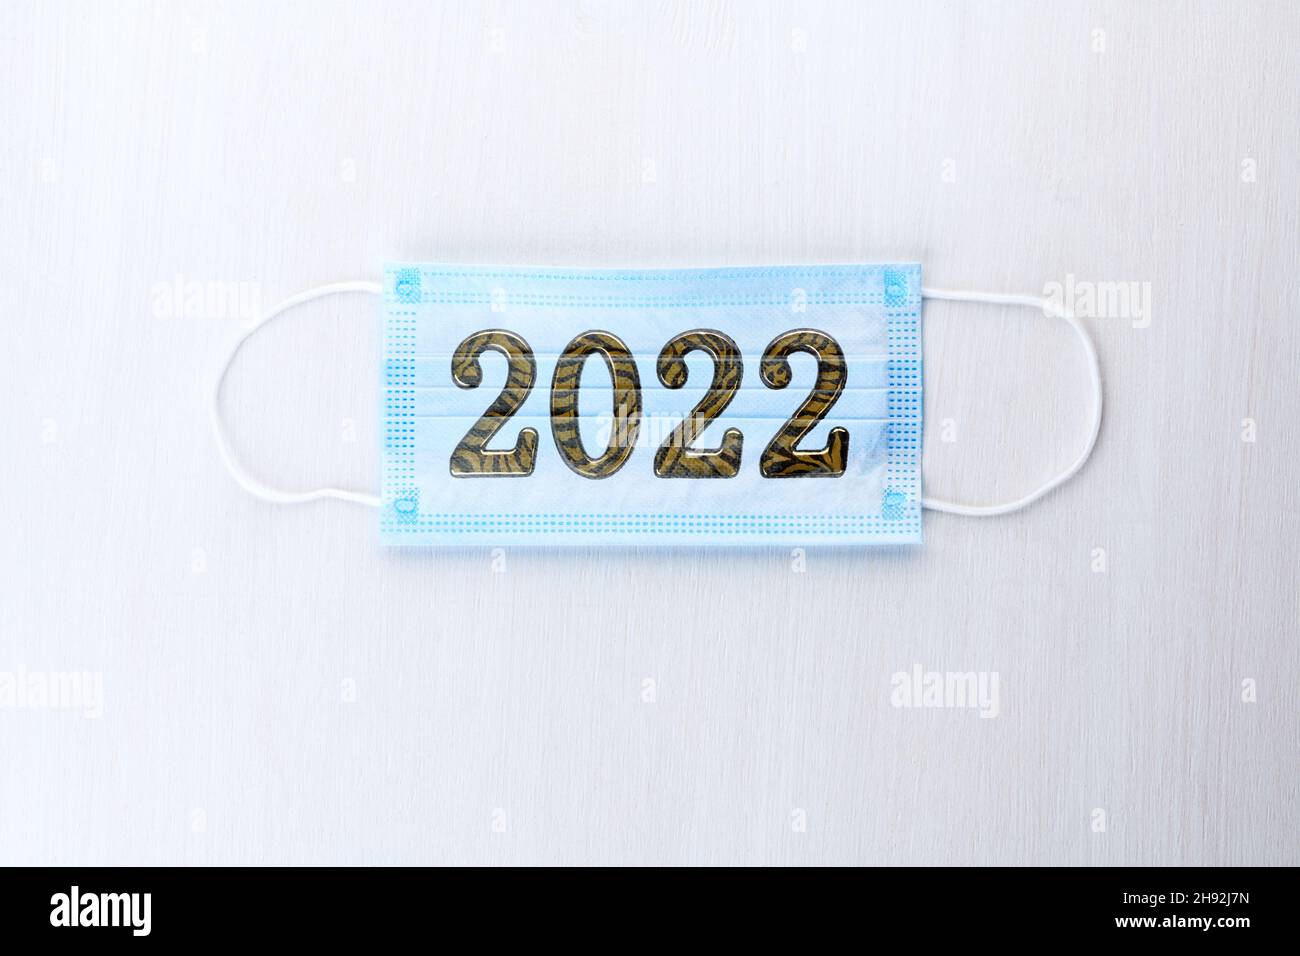 Medical mask with numbers 2022 Tiger on white wooden background. Coronavirus infection control concept. Symbol 2022 Tiger Stock Photo